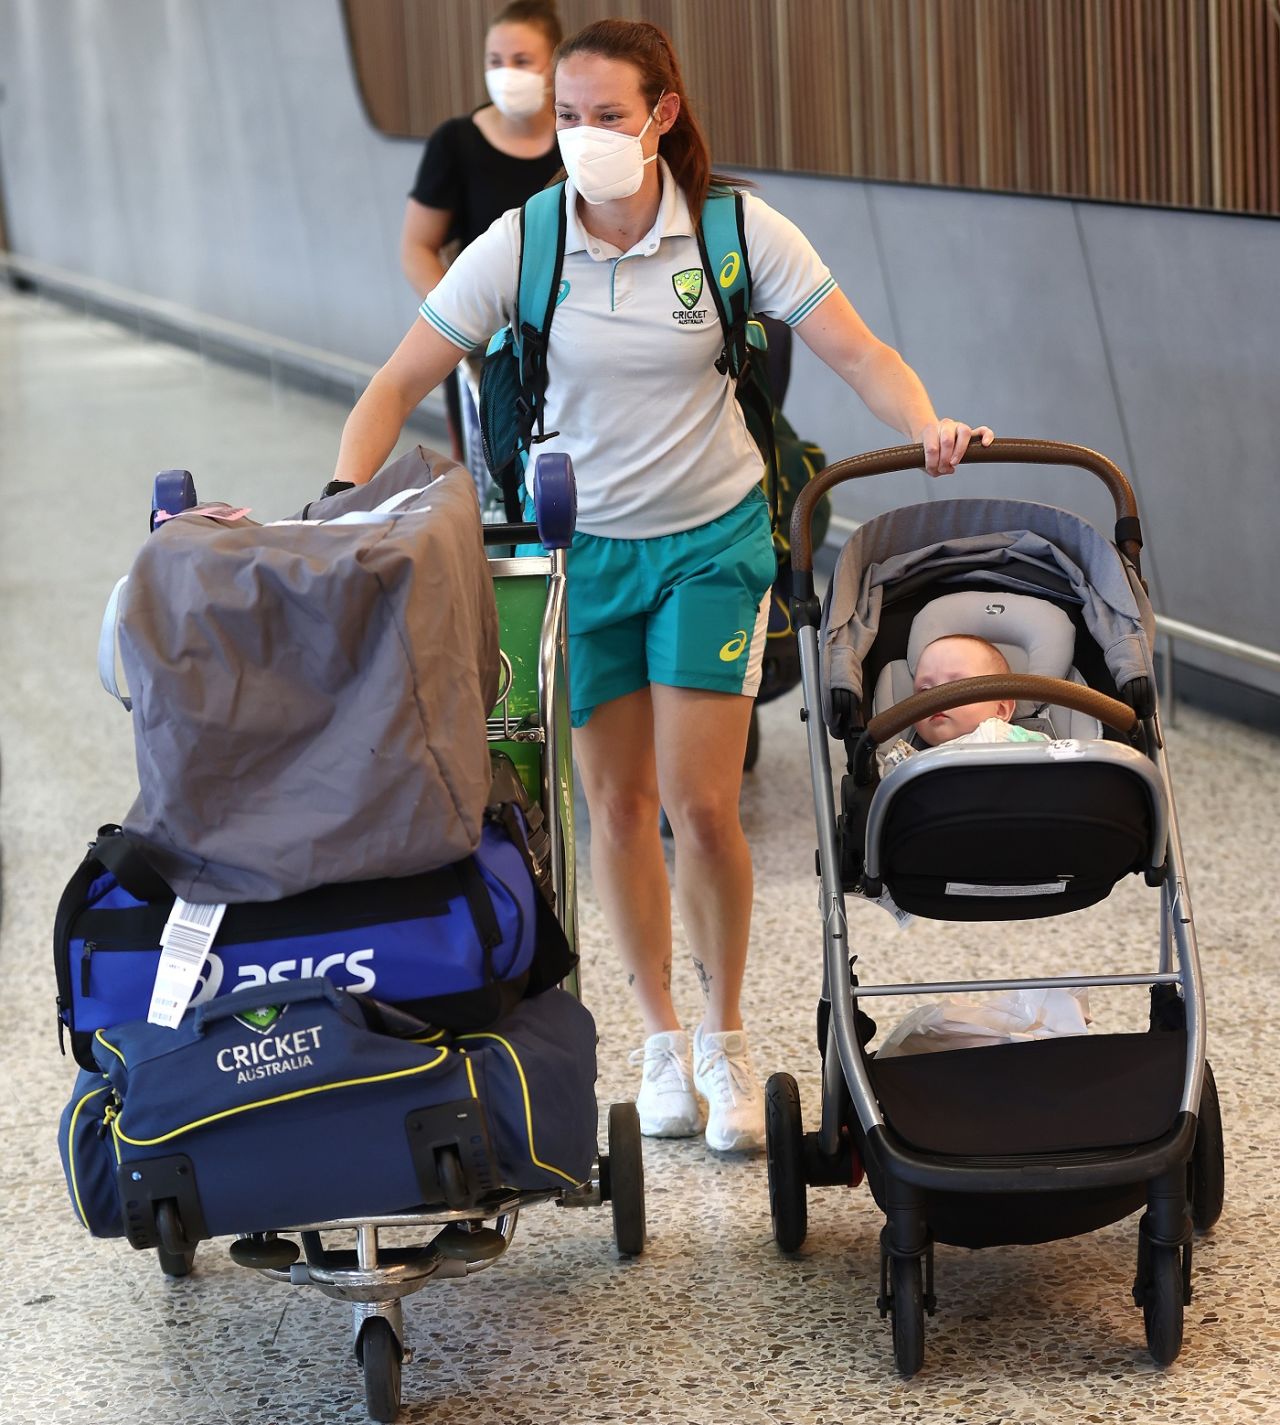 Megan Schutt arrives in Melbourne with her baby after the World Cup win, Women's World Cup 2022, April 5, 2022